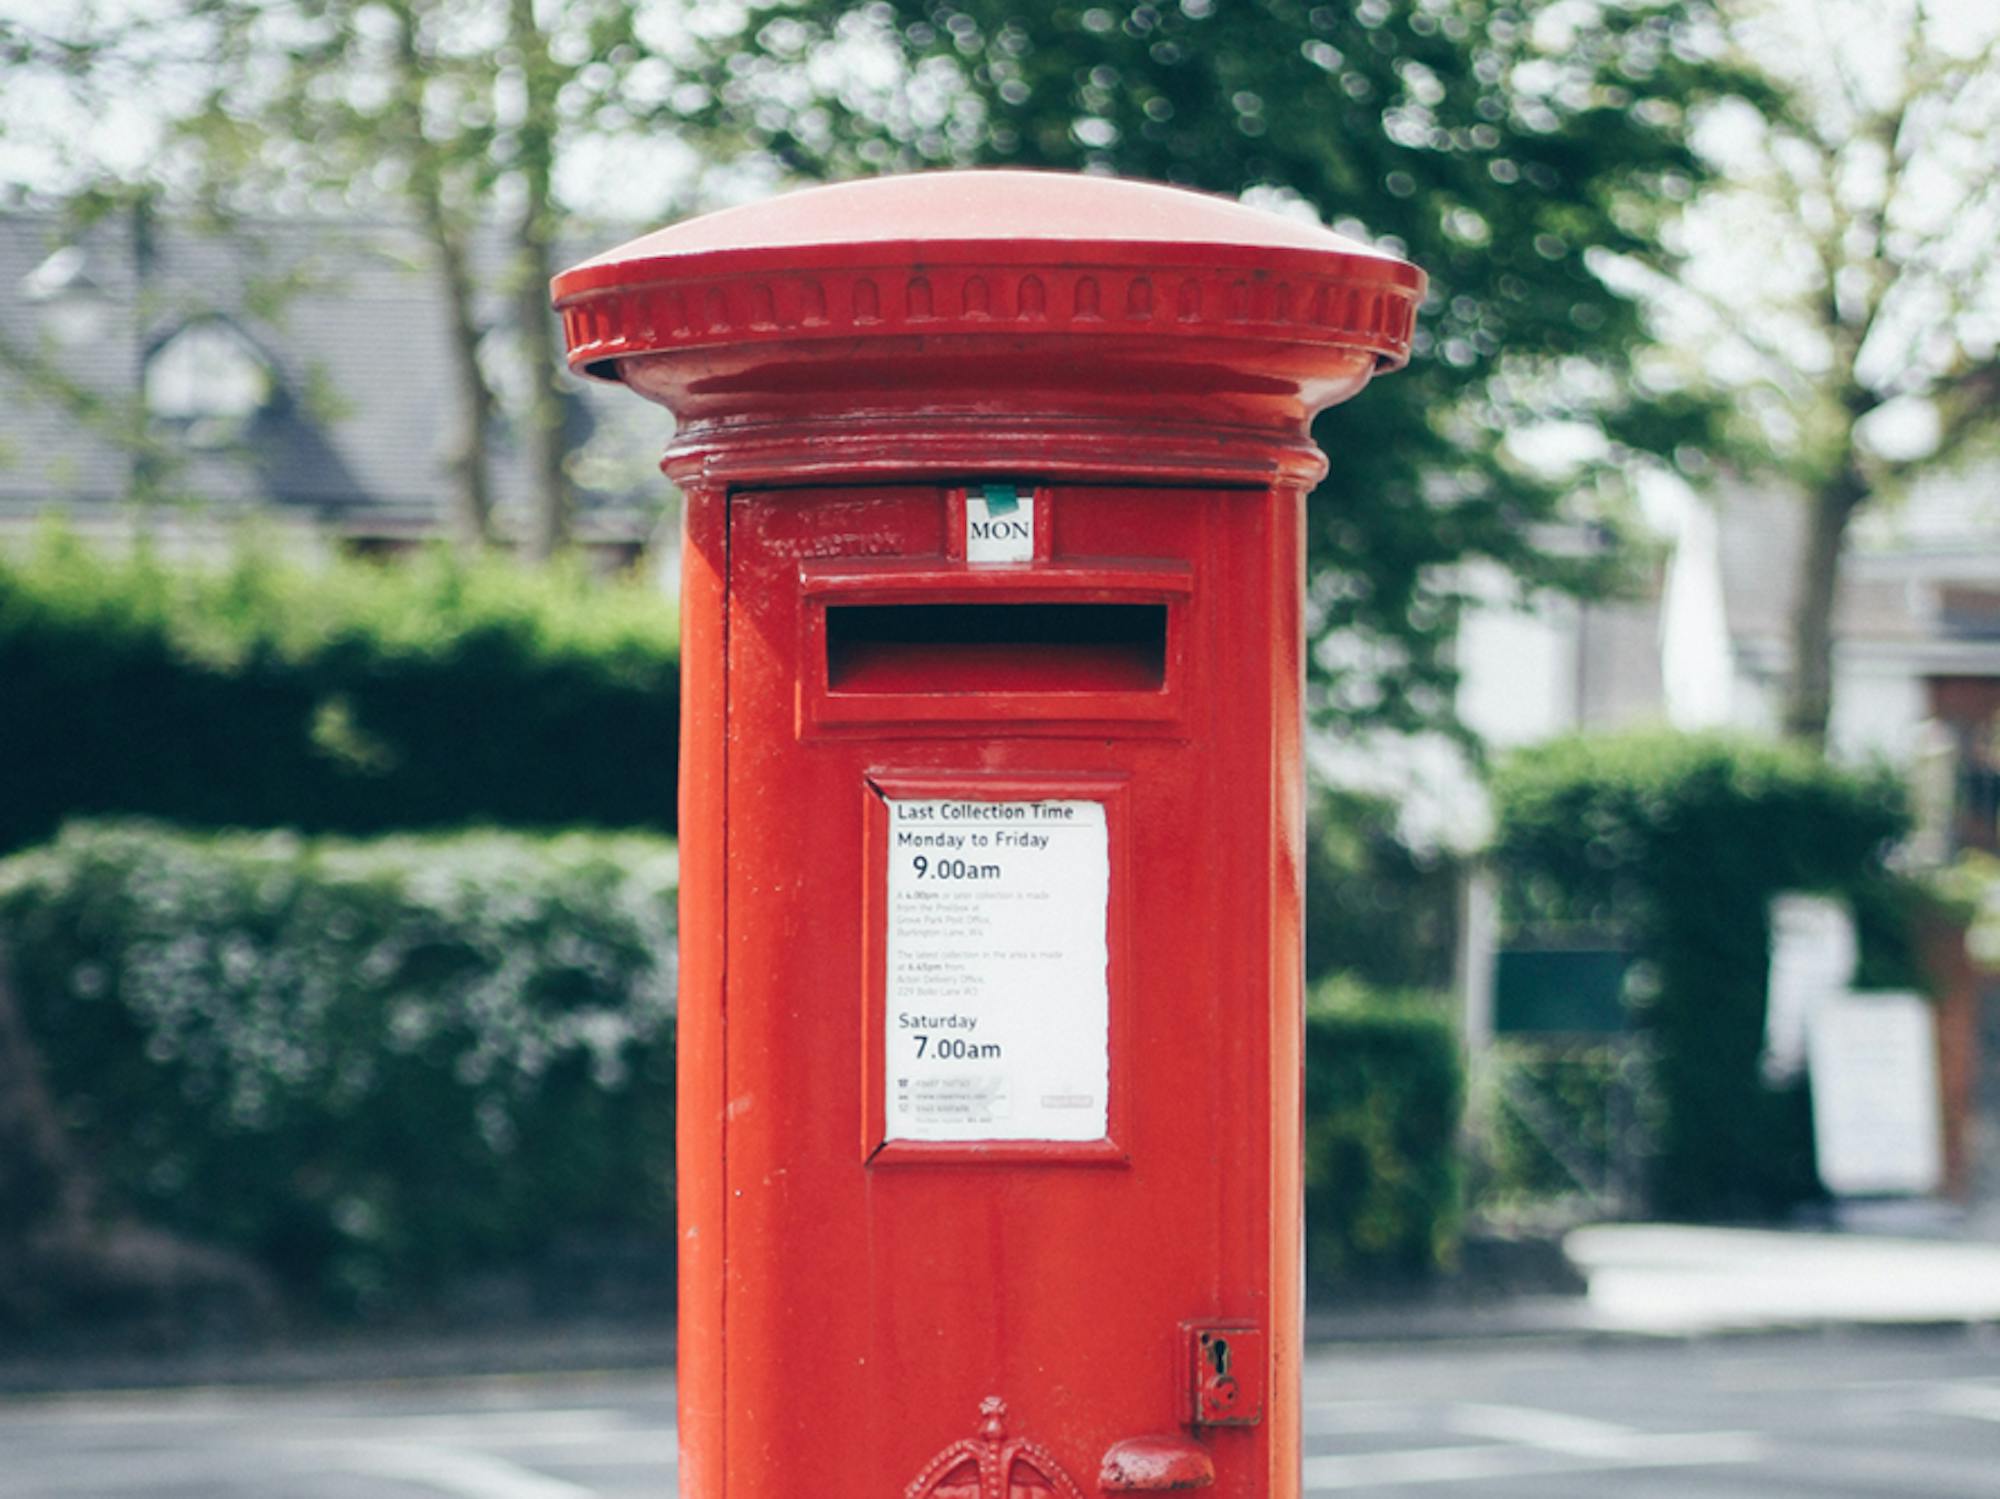 A mailbox in the UK